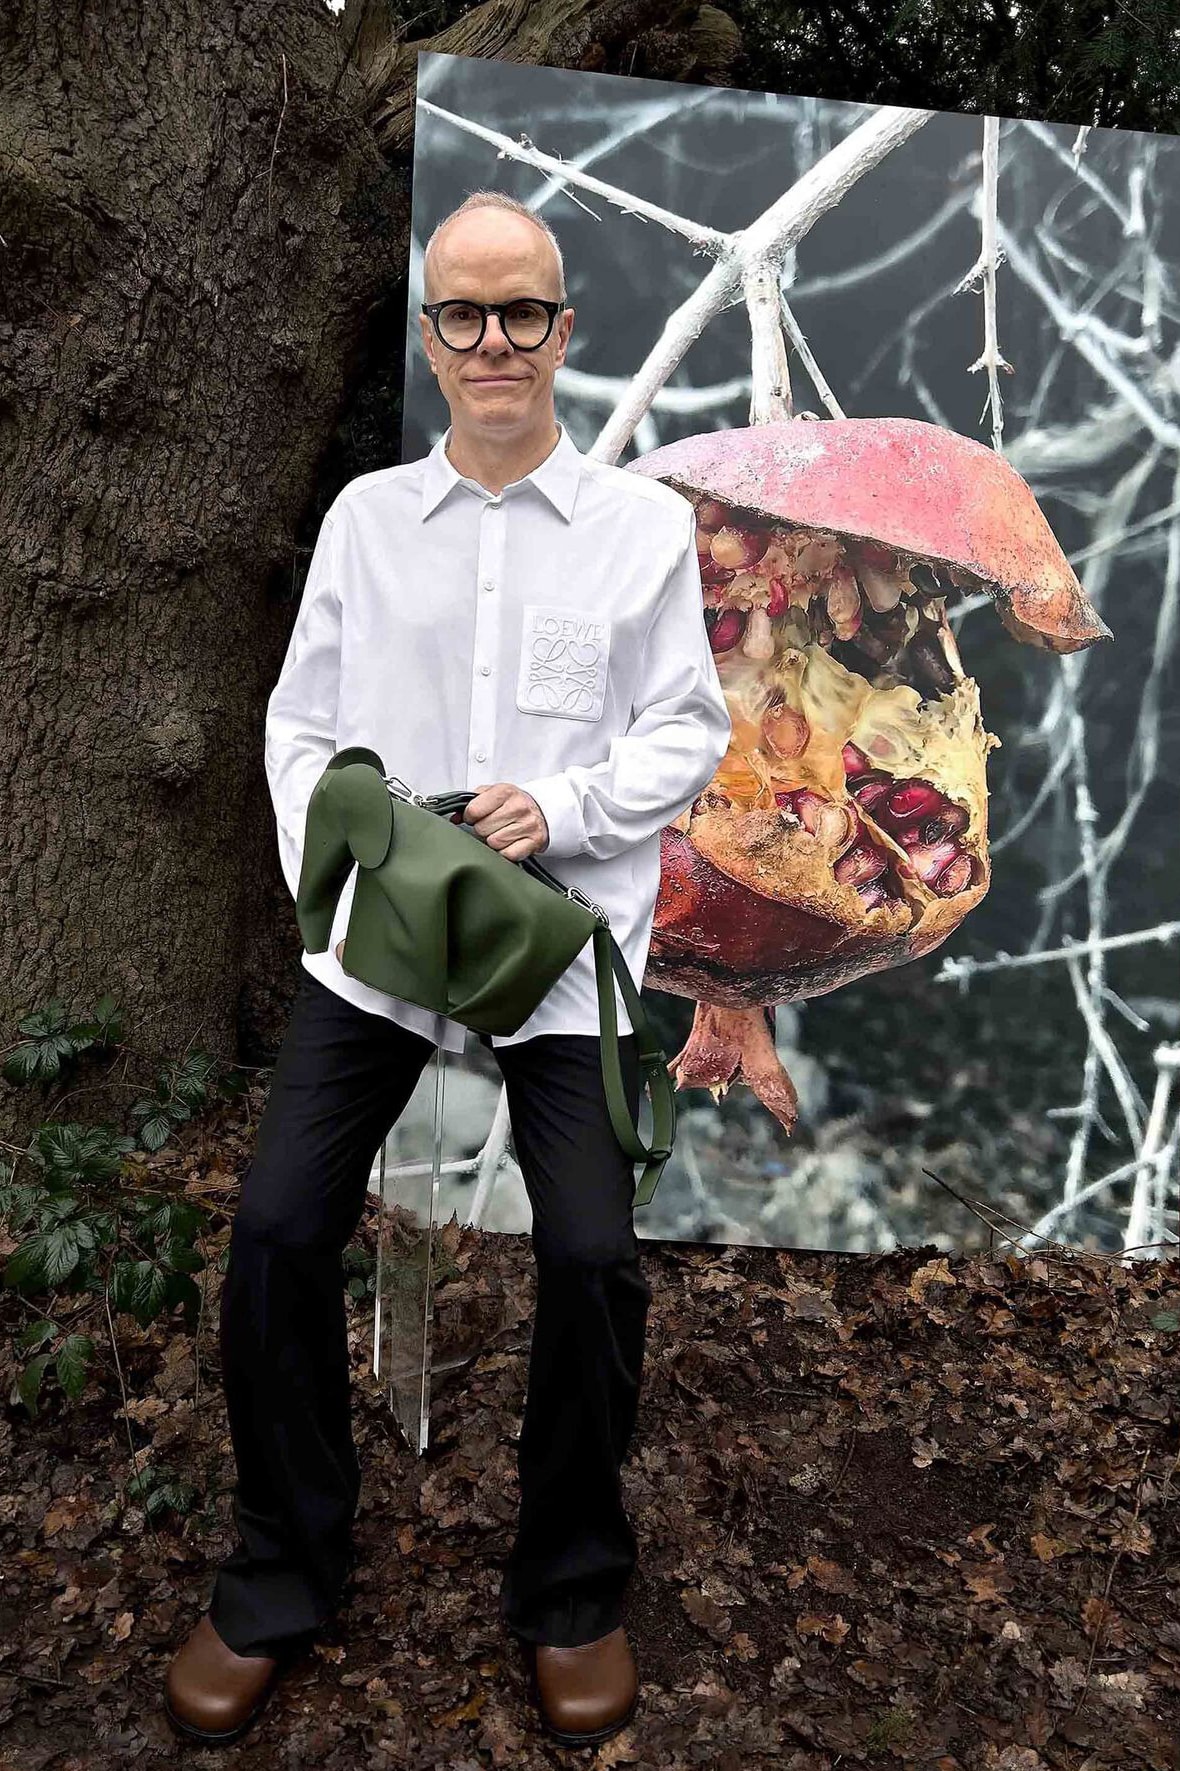 LOEWE Fall Winter 2023 Pre-Collection Campaign Jonathan Anderson Juergen Teller Aubrey Plaza Hans Ulrich Obrist Dev Hynes Takeshi Kitano Murray Bartlett The White Lotus